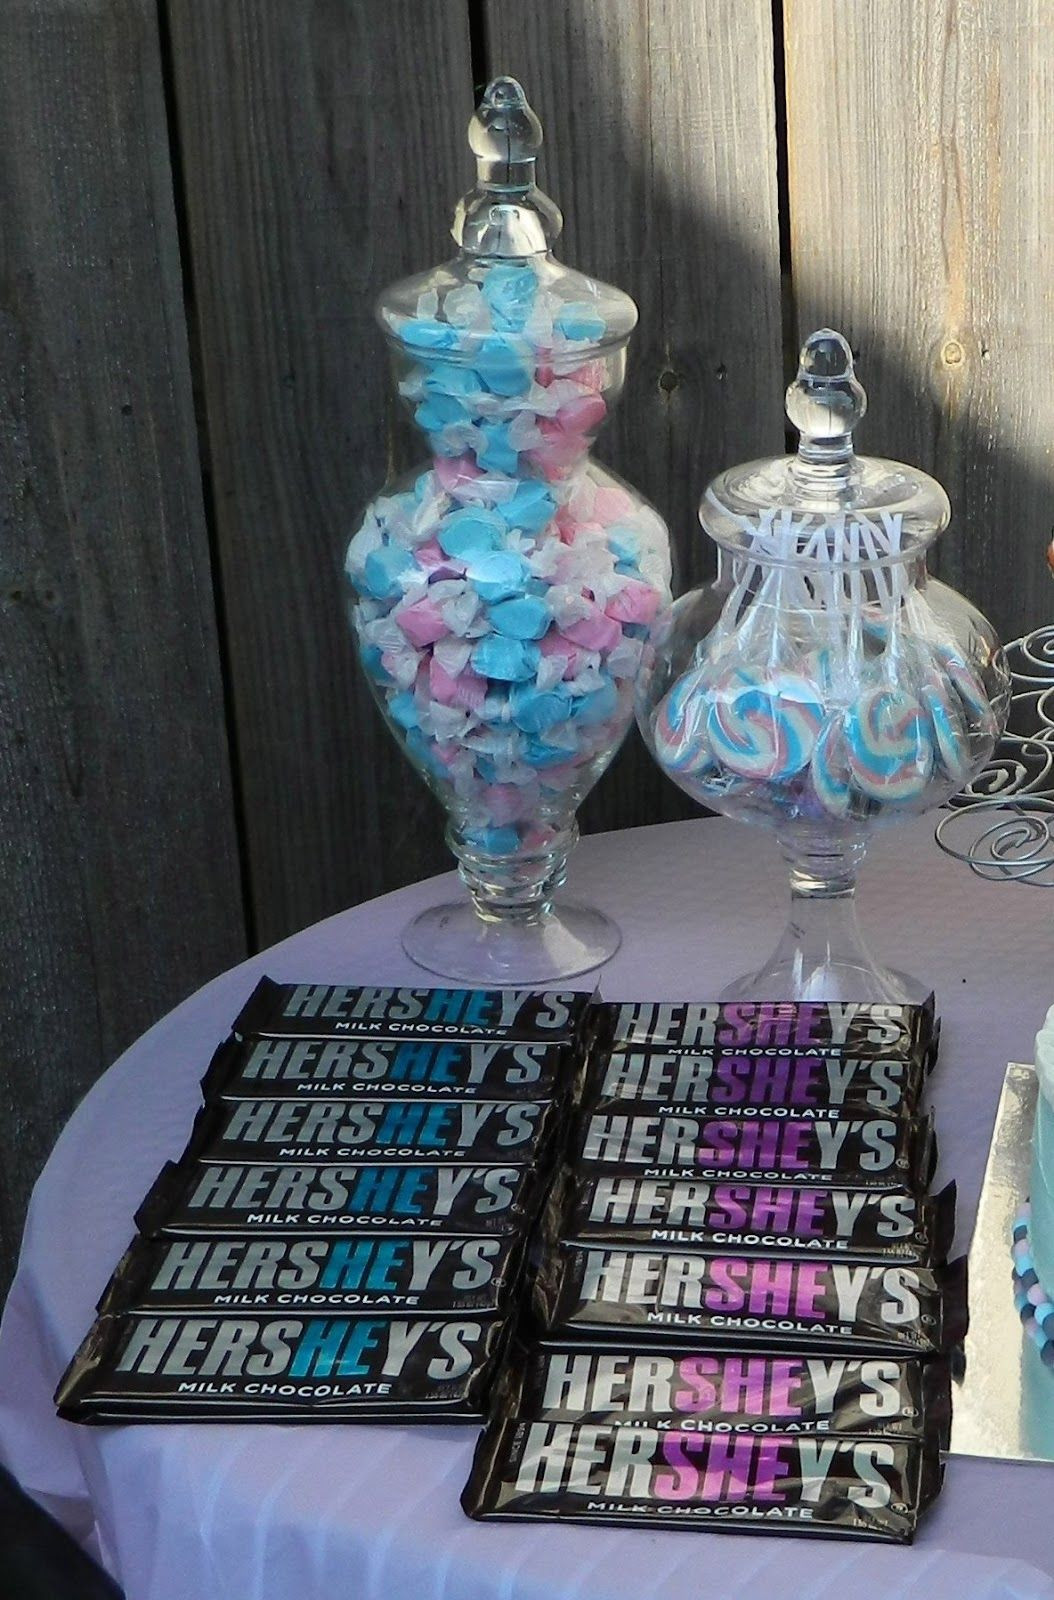 Gift Ideas For Baby Gender Reveal Party
 21 Best Ideas Baby Gender Reveal Party Gifts Home